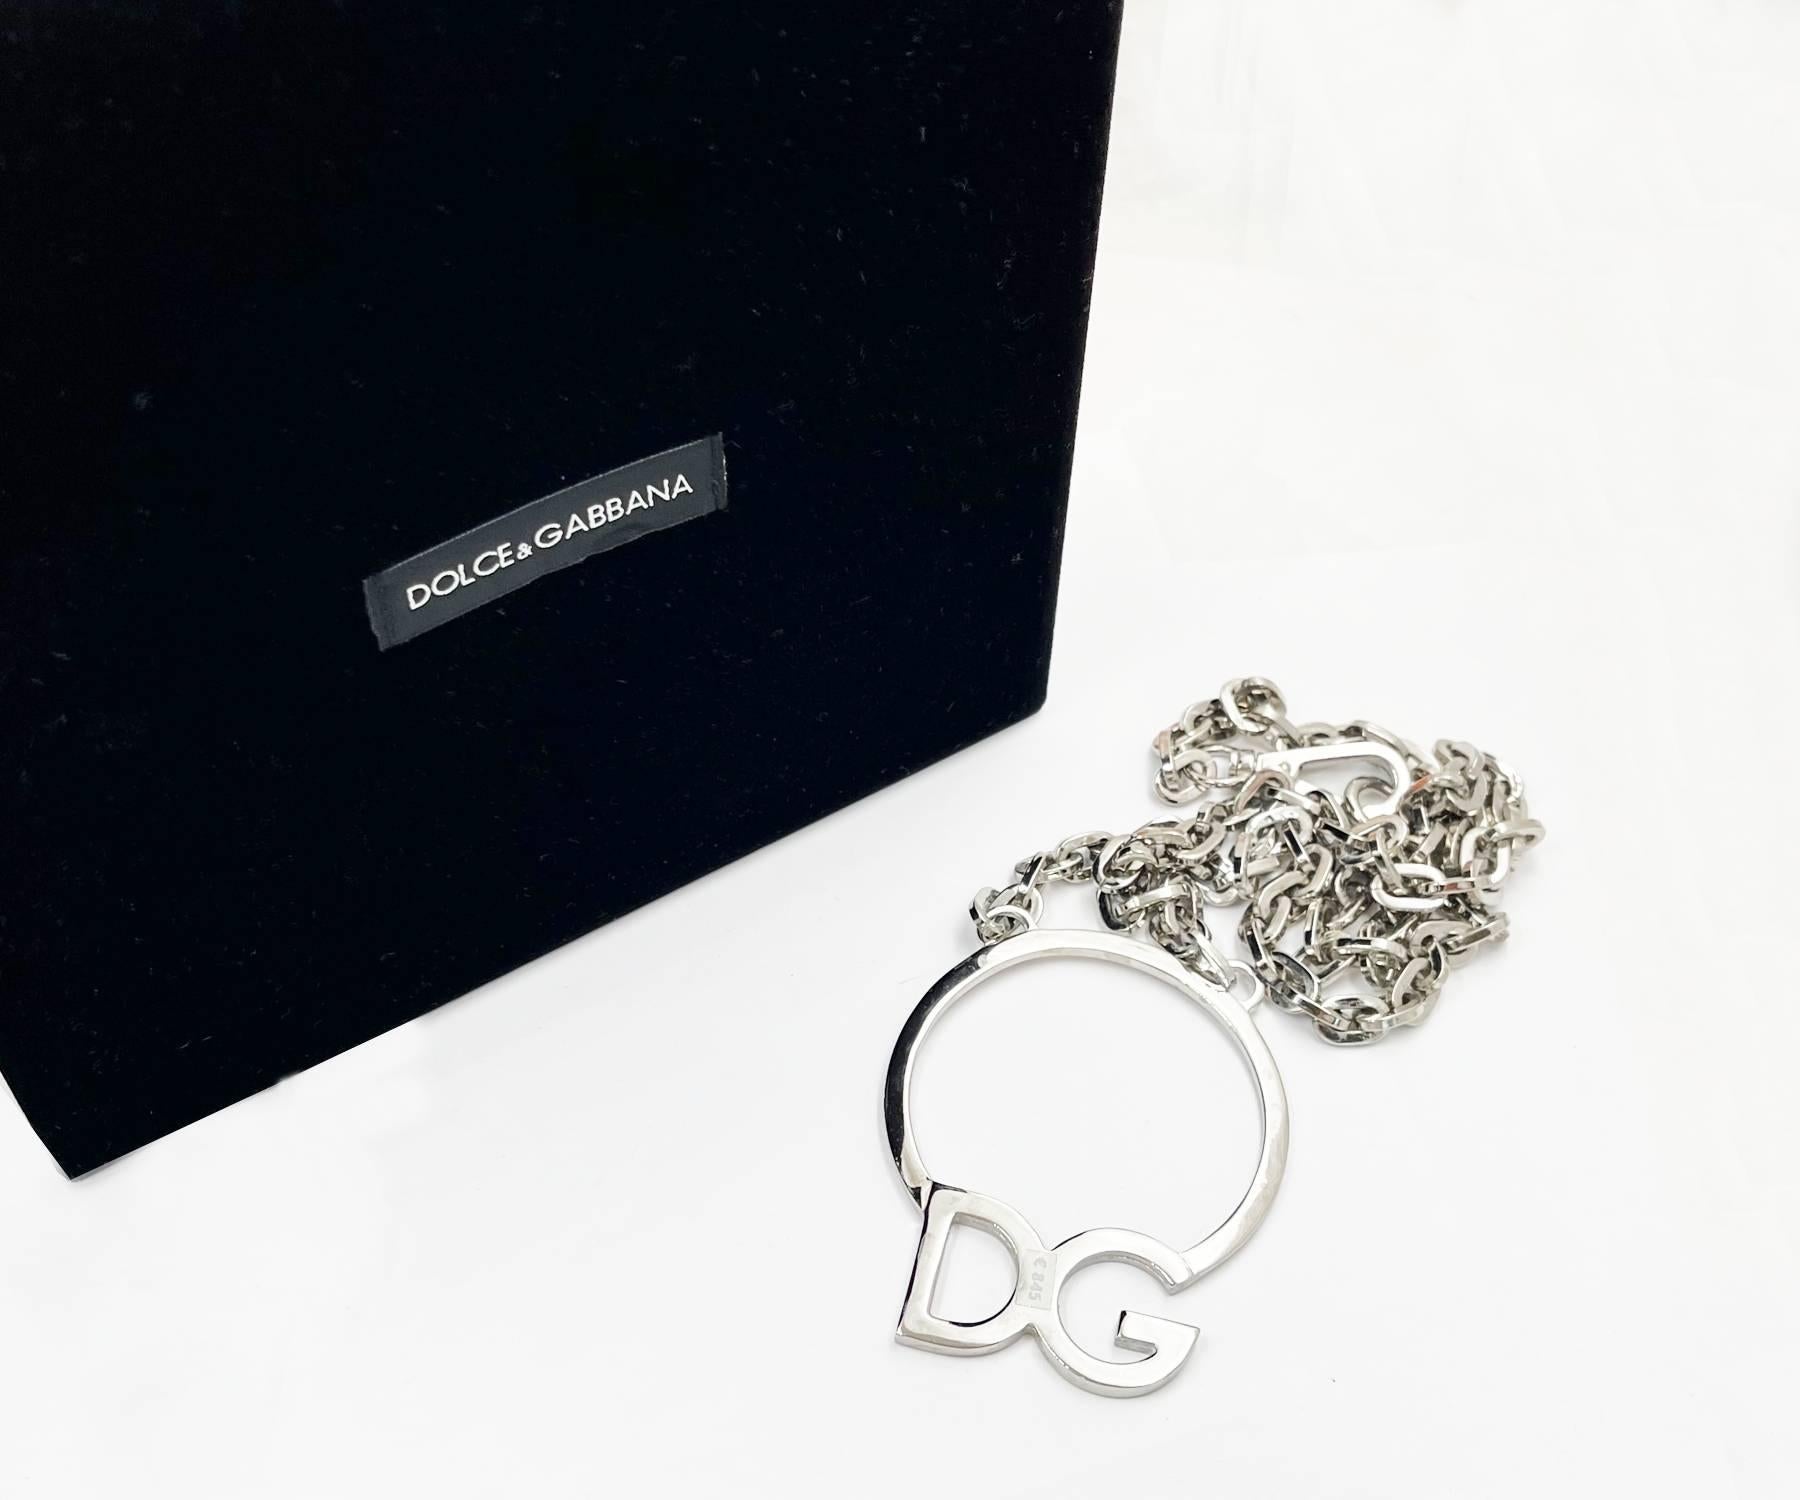 Dolce &Gabbana Silver Large Pendant Chain Long Necklace

*Marked Dolce &Gabbana
*Comes with the original velvet hard case box and price sticket
*Brand New. Floor Display
*Original price was 845 euro

-The chain is approximately 30″.
-The pendant is